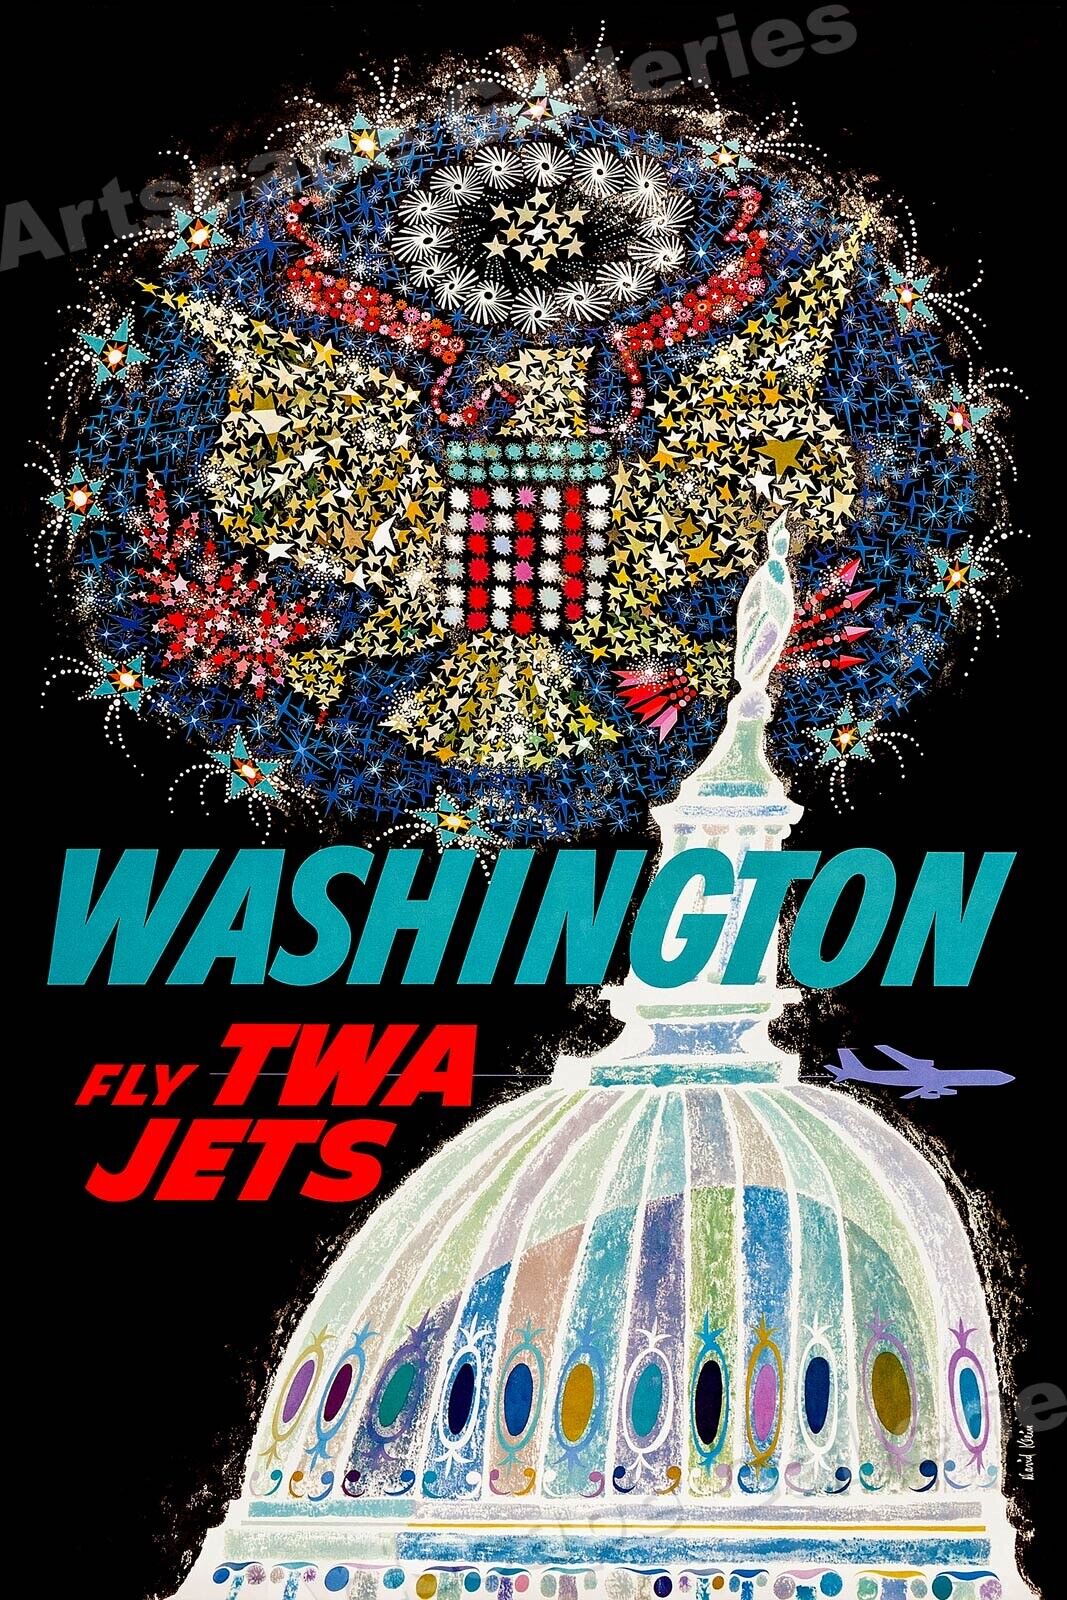 1960s Washington DC Vintage Style Airline Travel Poster - 16x24